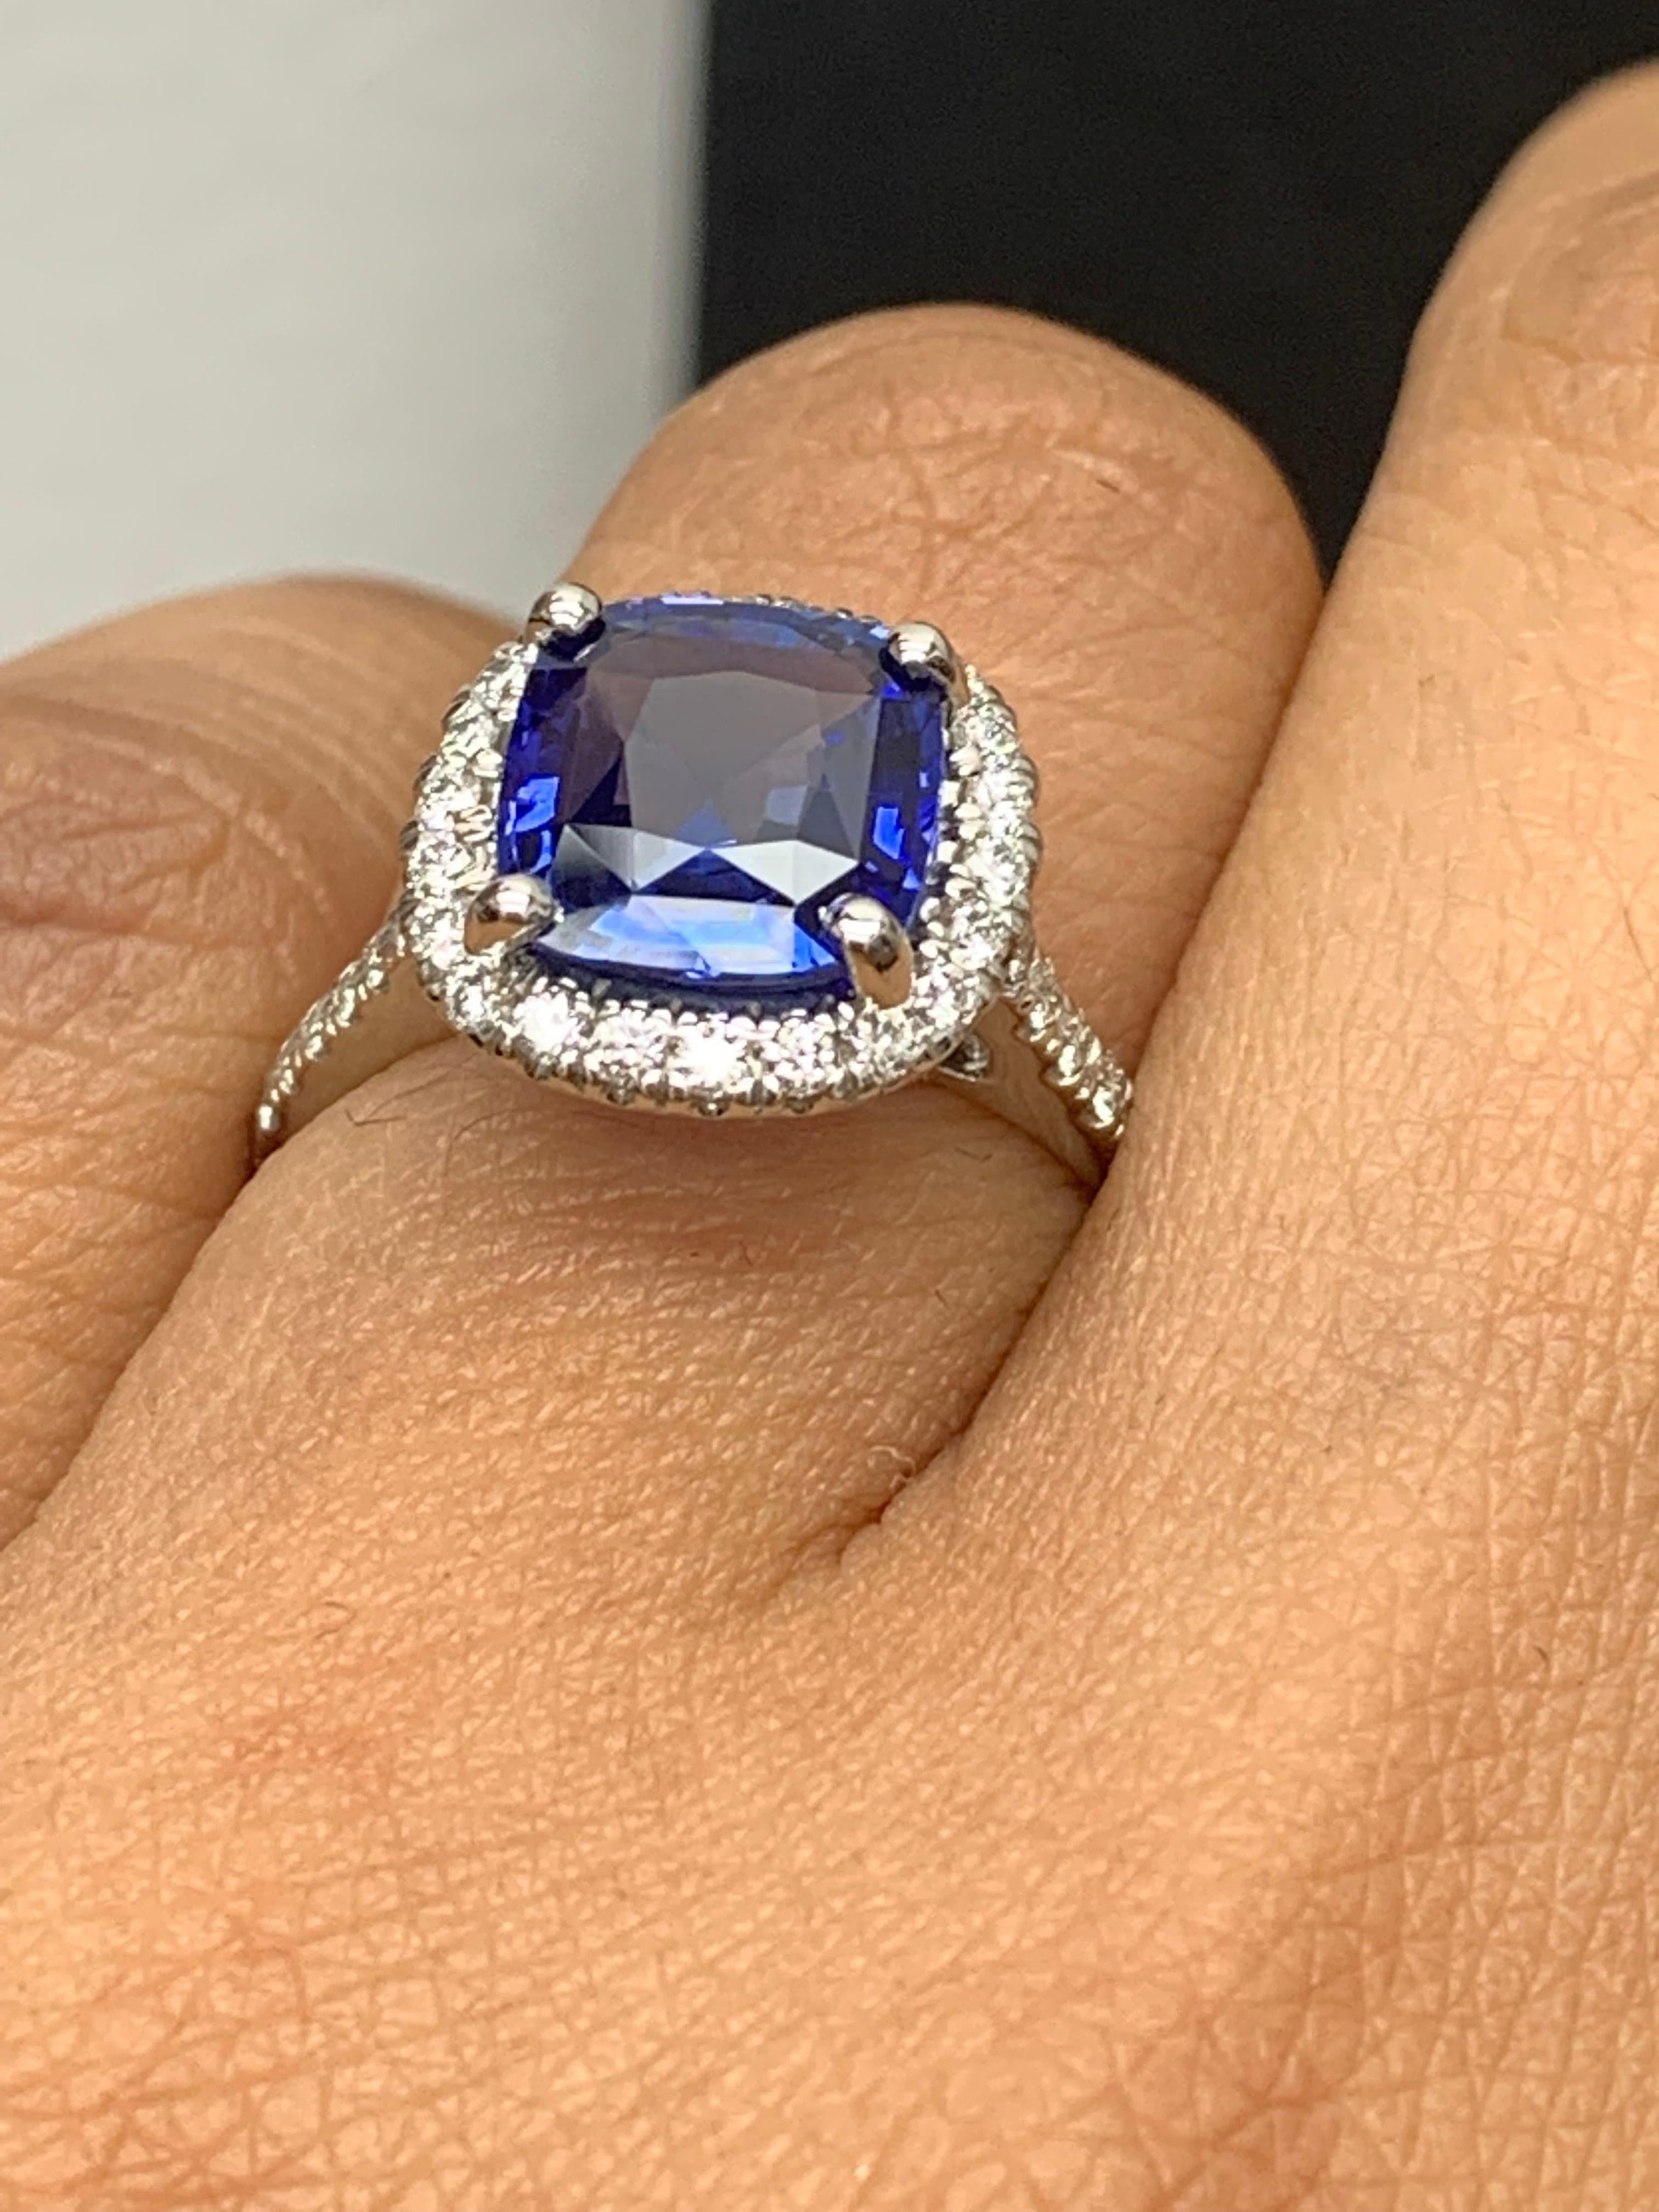 Women's 3.07 Carat Cushion Cut Sapphire and Diamond Halo Ring in Platinum For Sale